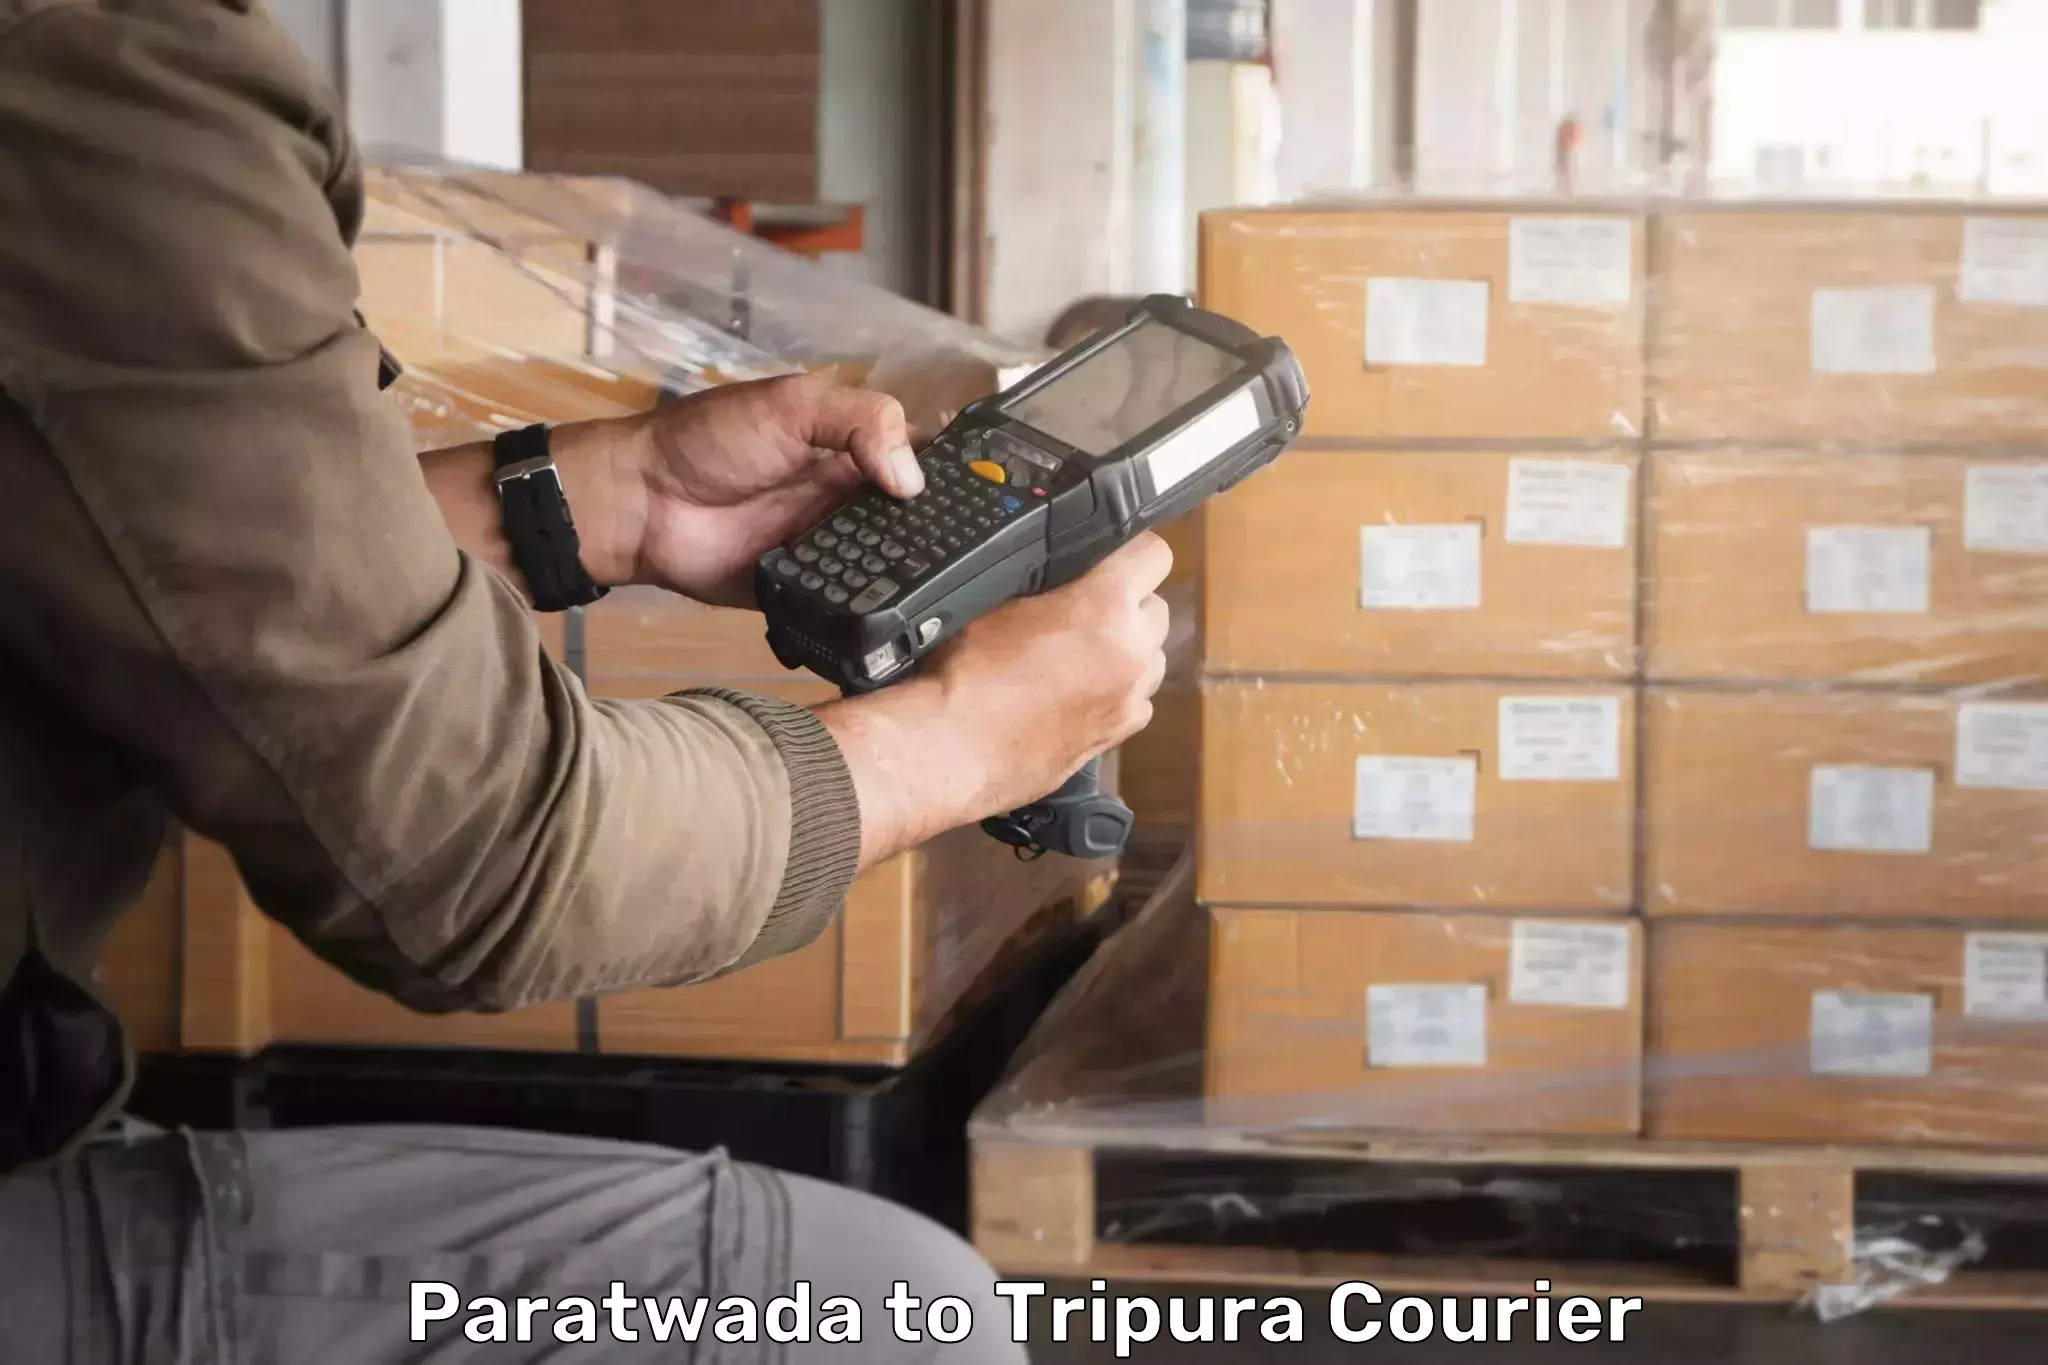 Domestic delivery options Paratwada to Udaipur Tripura